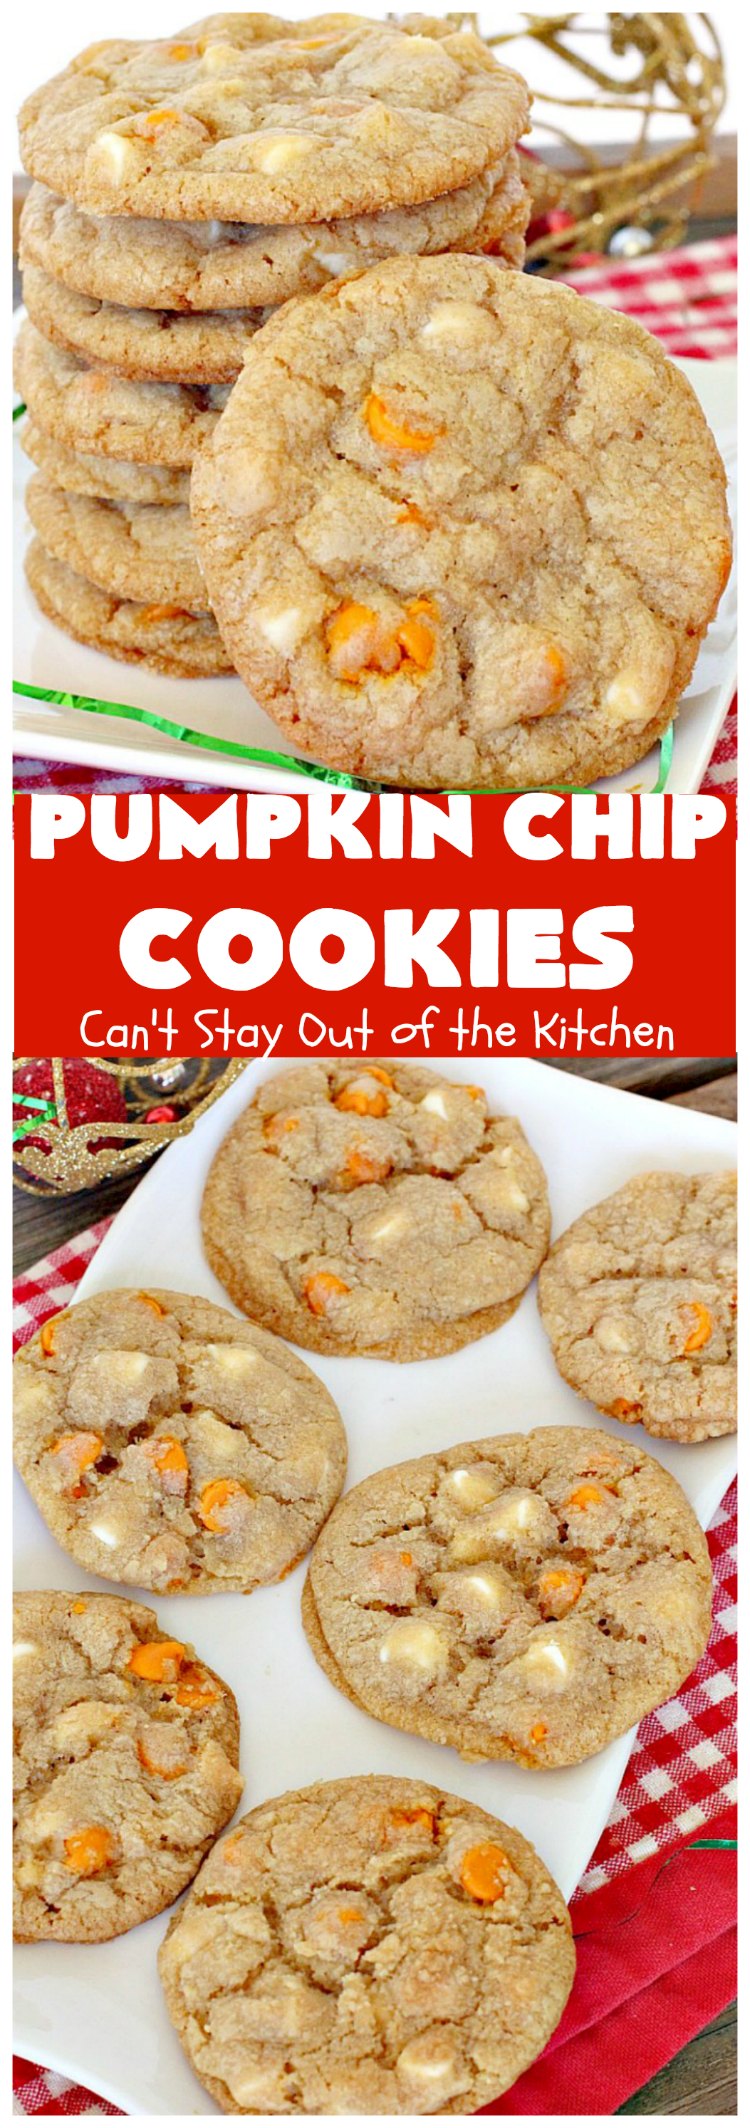 Pumpkin Chip Cookies | Can't Stay Out of the Kitchen